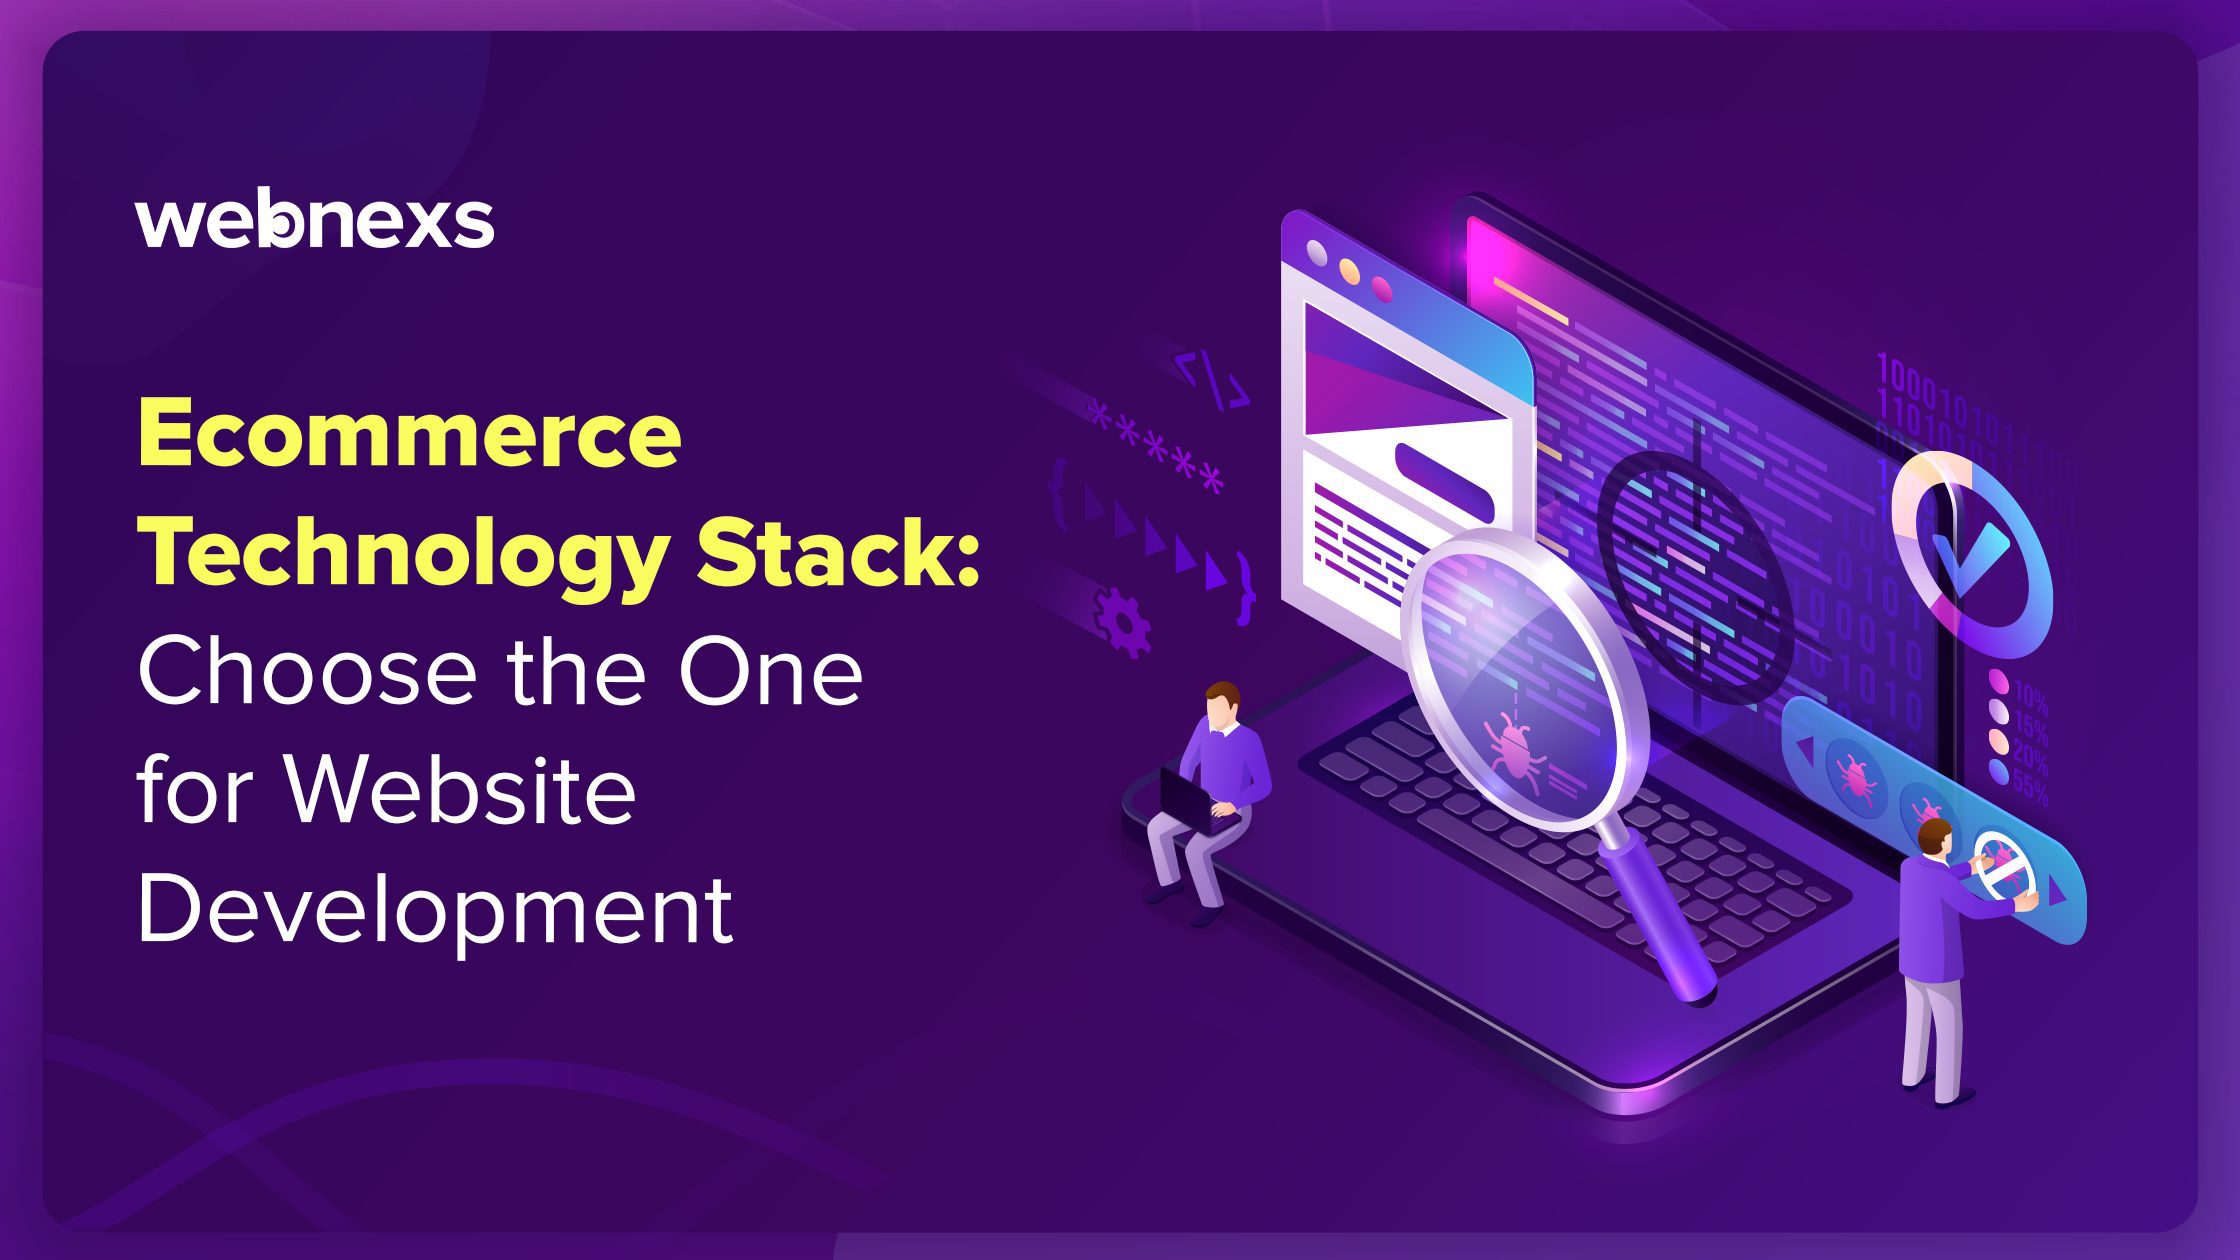 Ecommerce Technology Stack: Choose the One for Website Development